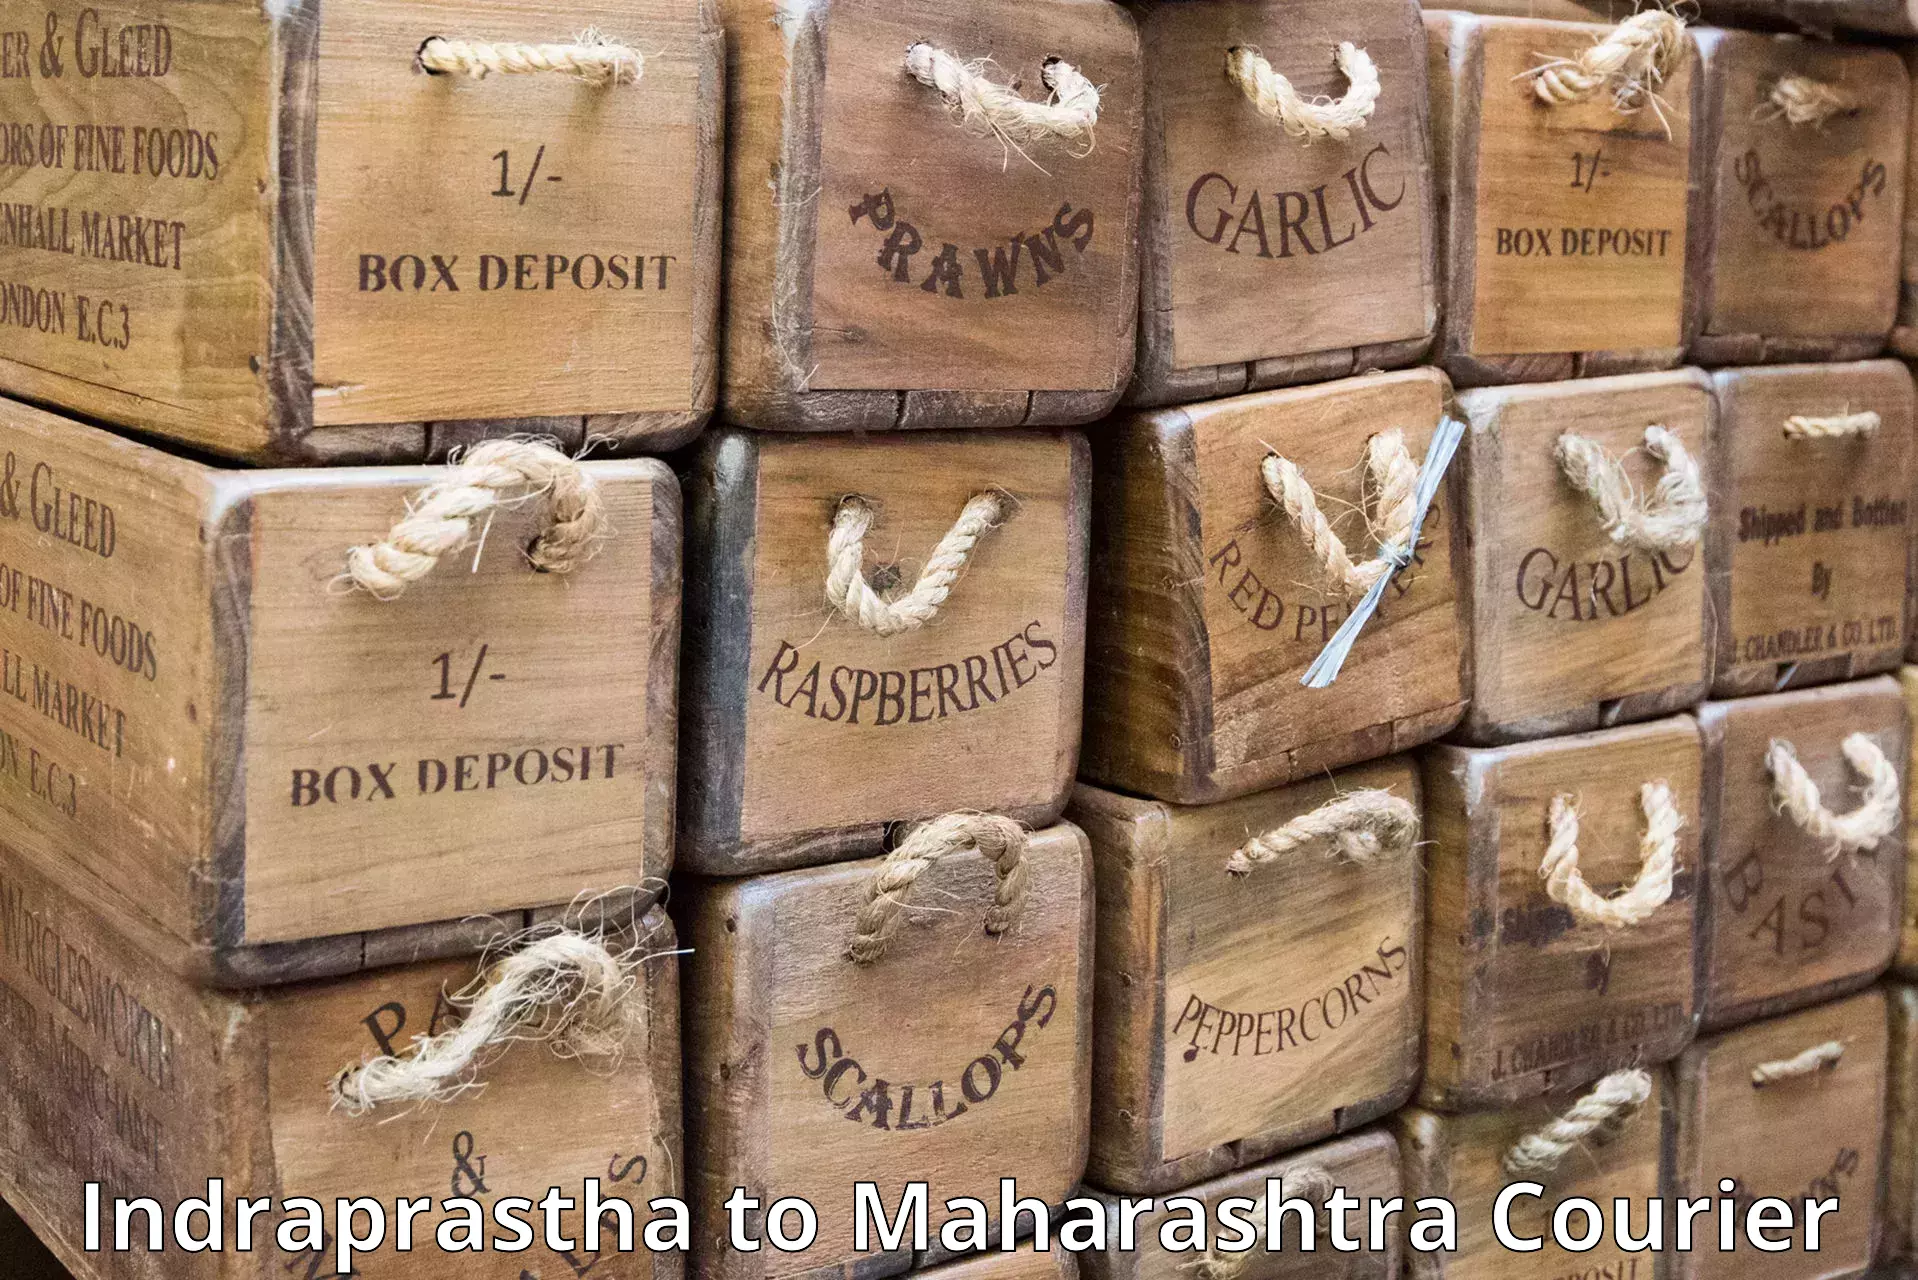 Next-day delivery options Indraprastha to Bhandara